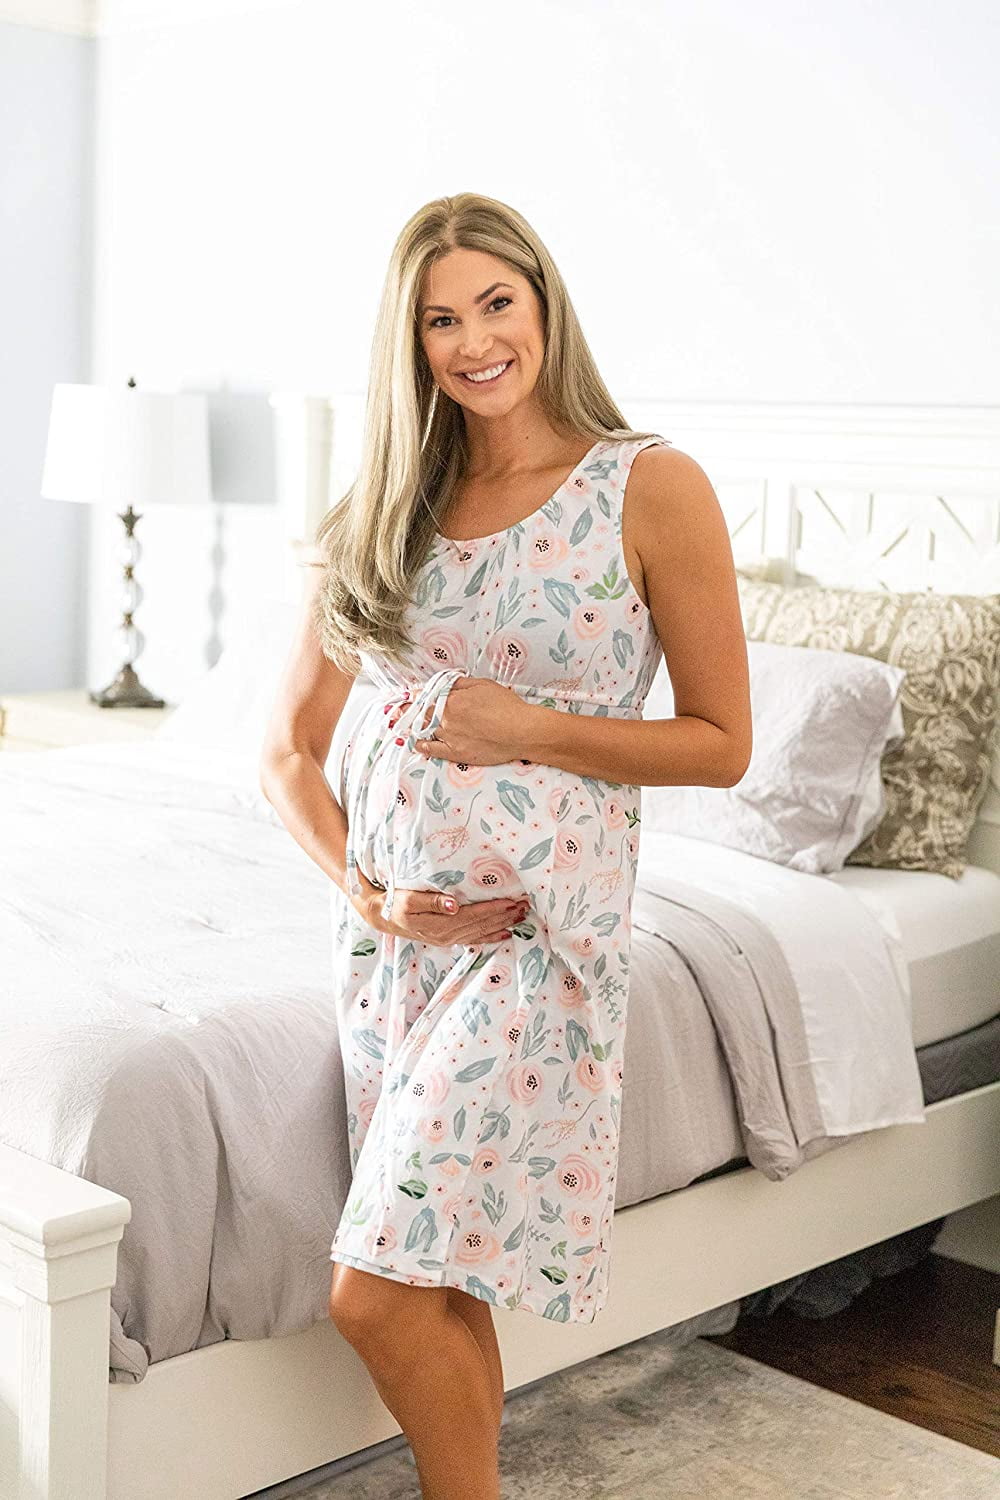 Baby Be Mine MaternityNursing Sleeveless Nightgown  Delivery Robe Set Nursing  Gown Maternity Gown Night Gown For Women With Maternity Robe Set  Walmart com